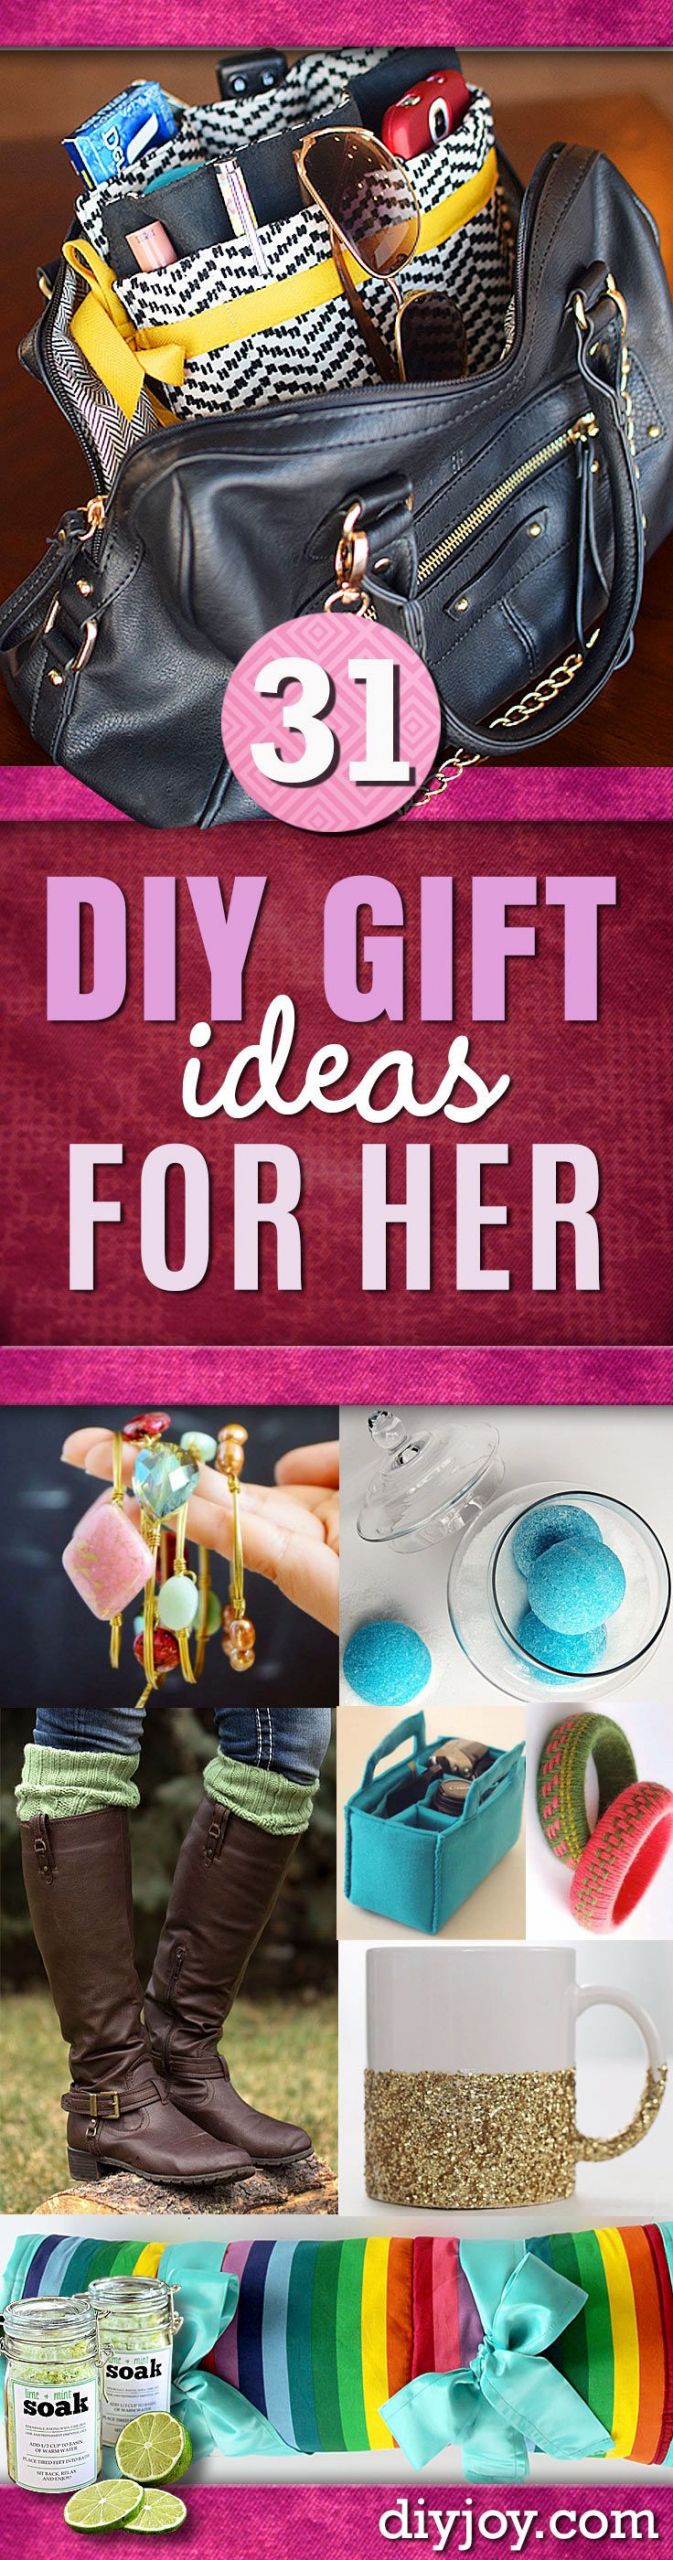 Christmas Gift Ideas For Wife And Mother
 DIY Gift Ideas for Her